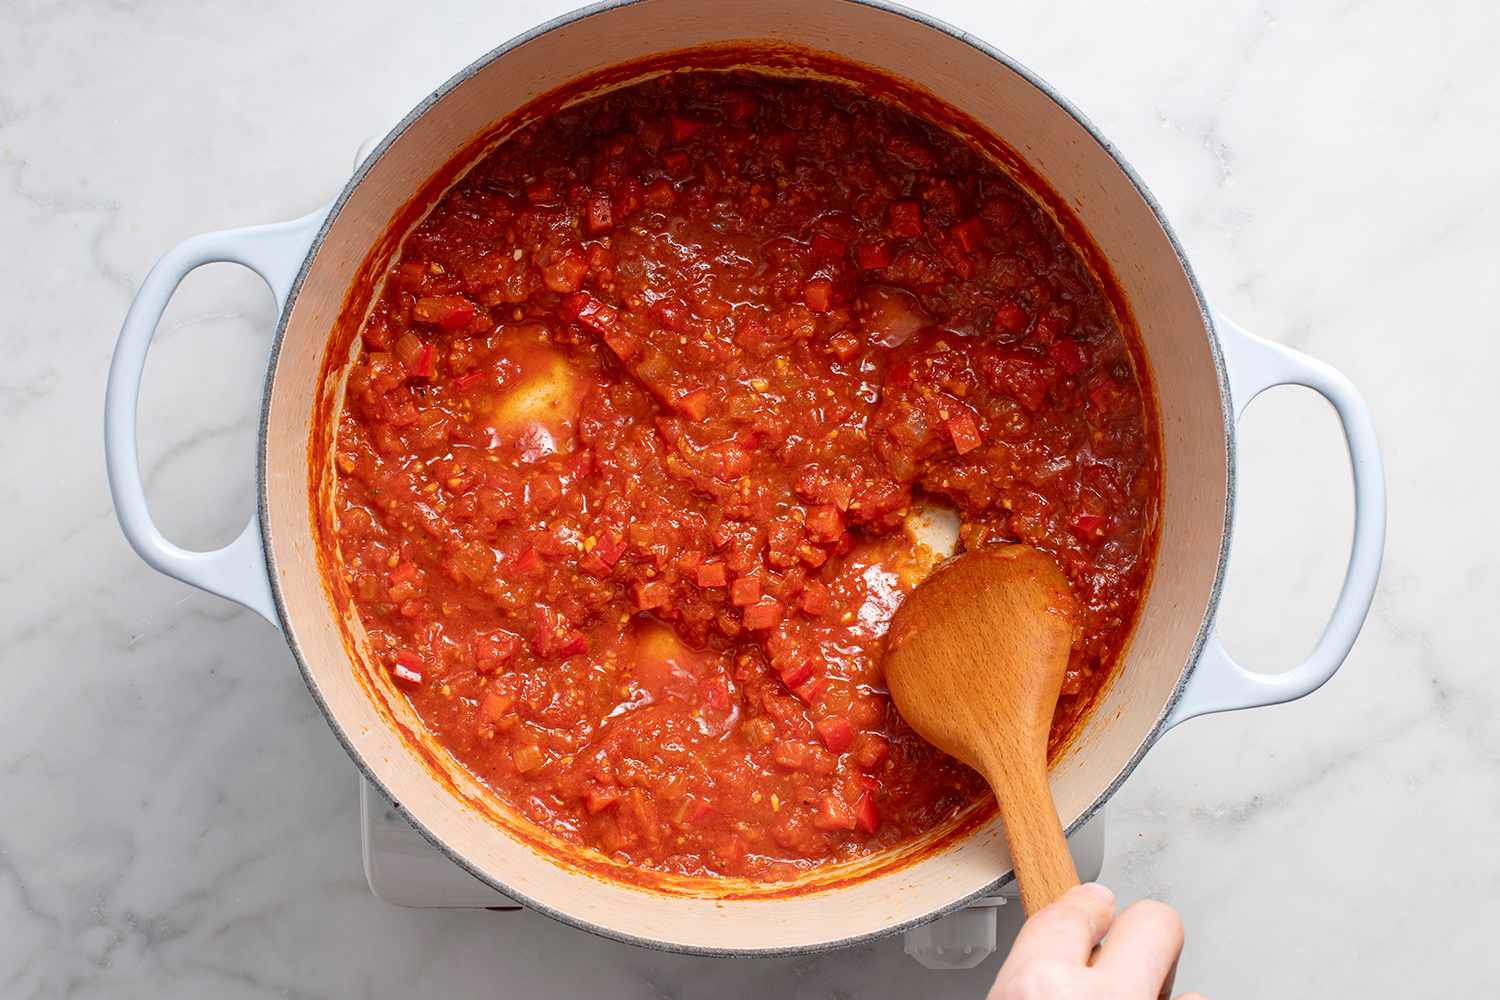 Space created in the tomato sauce in the pot, with a wooden spoon, on a burner 